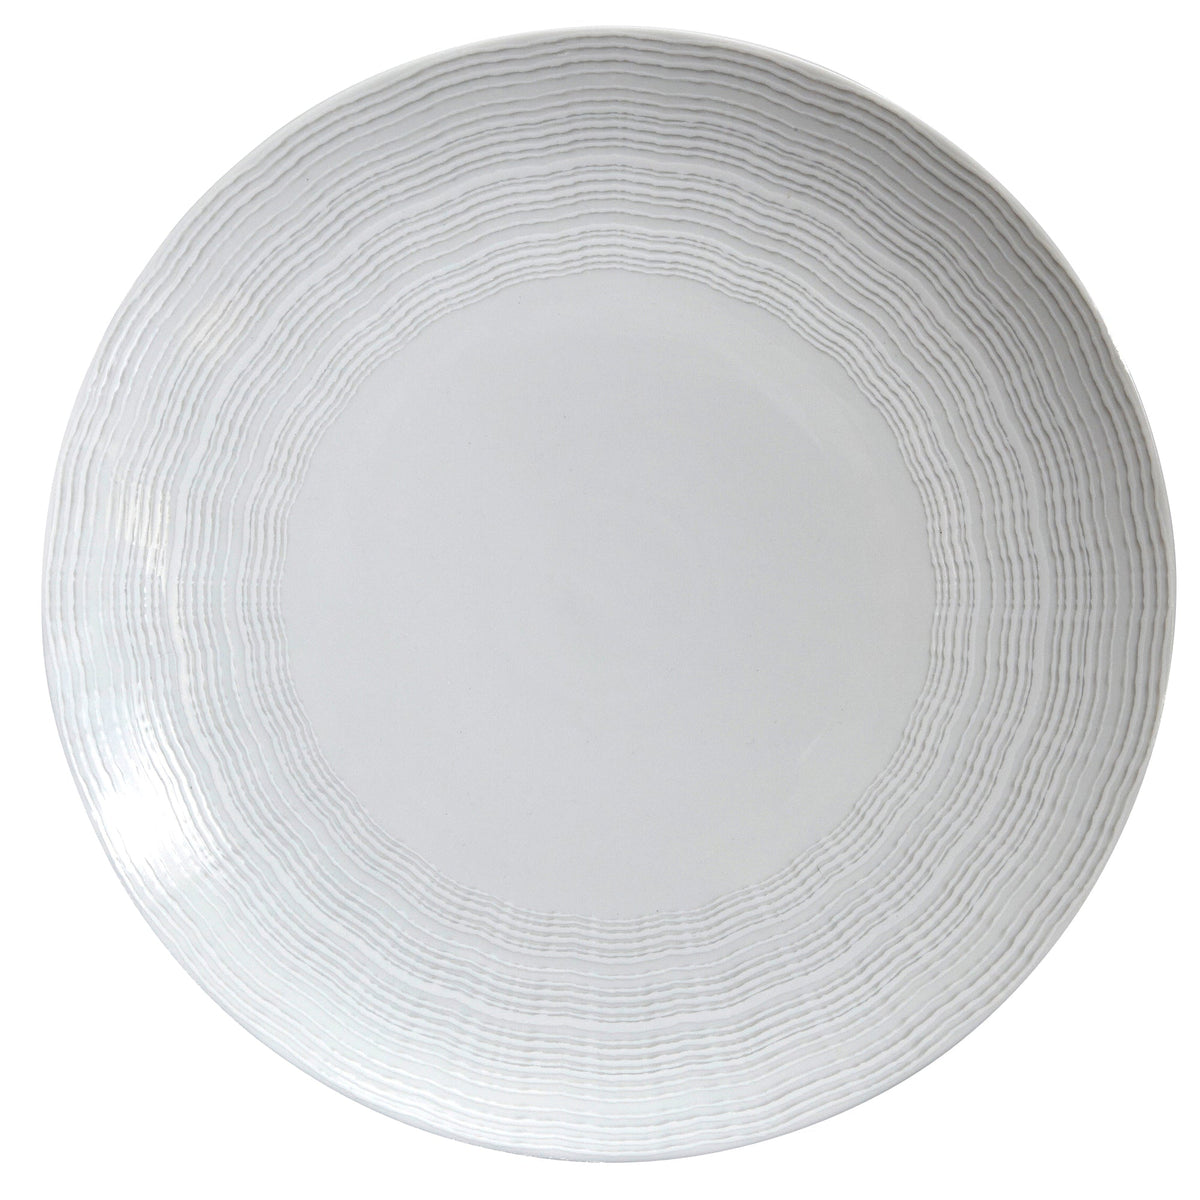 Mar Charger Plate